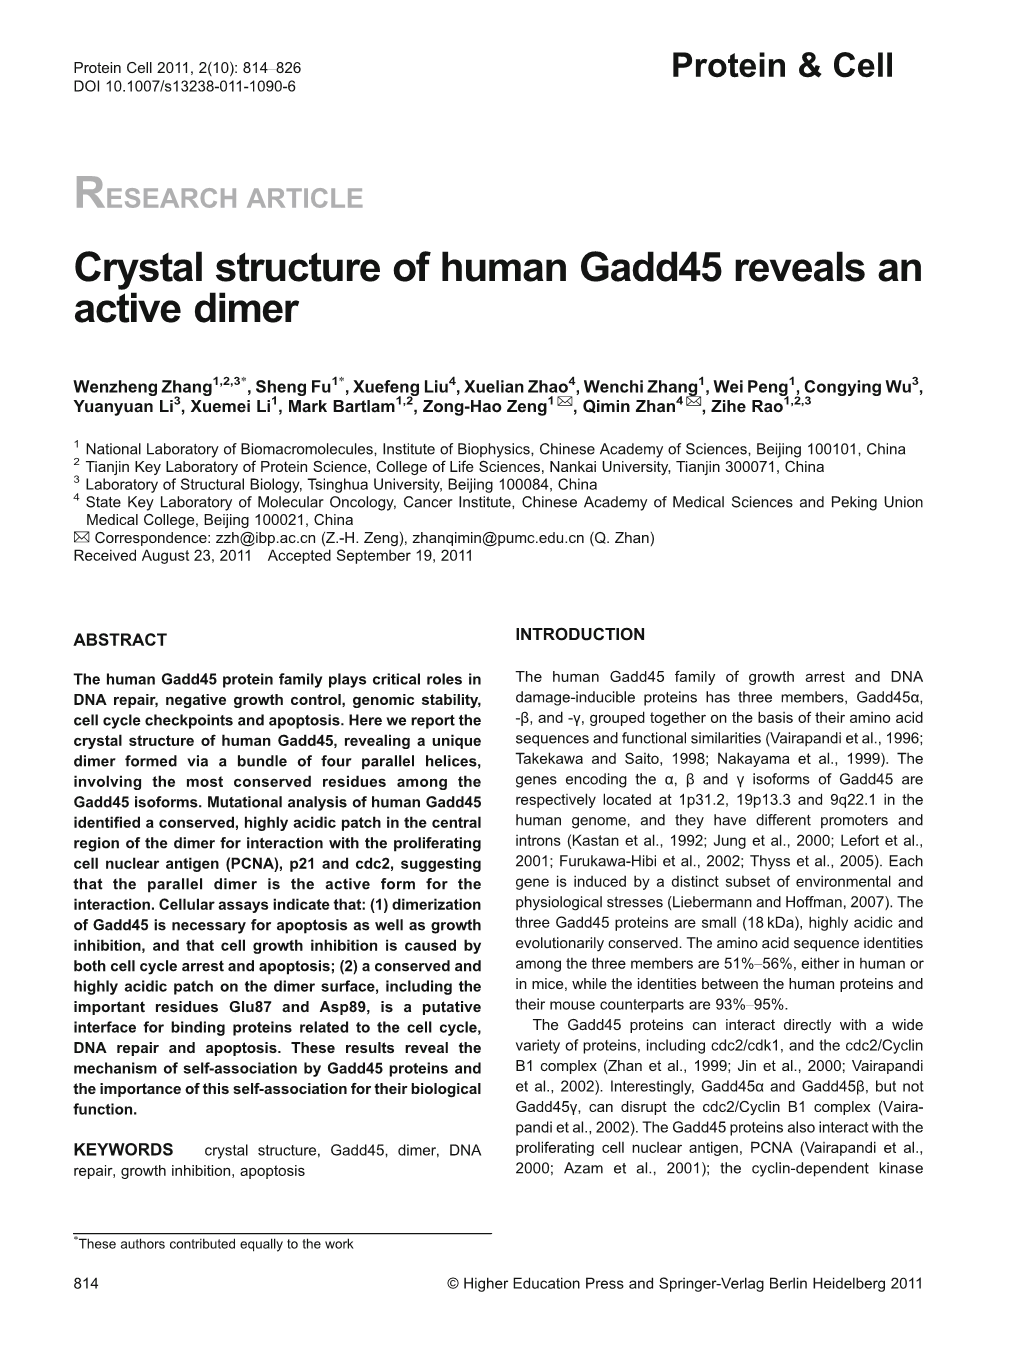 Crystal Structure of Human Gadd45 Reveals an Active Dimer